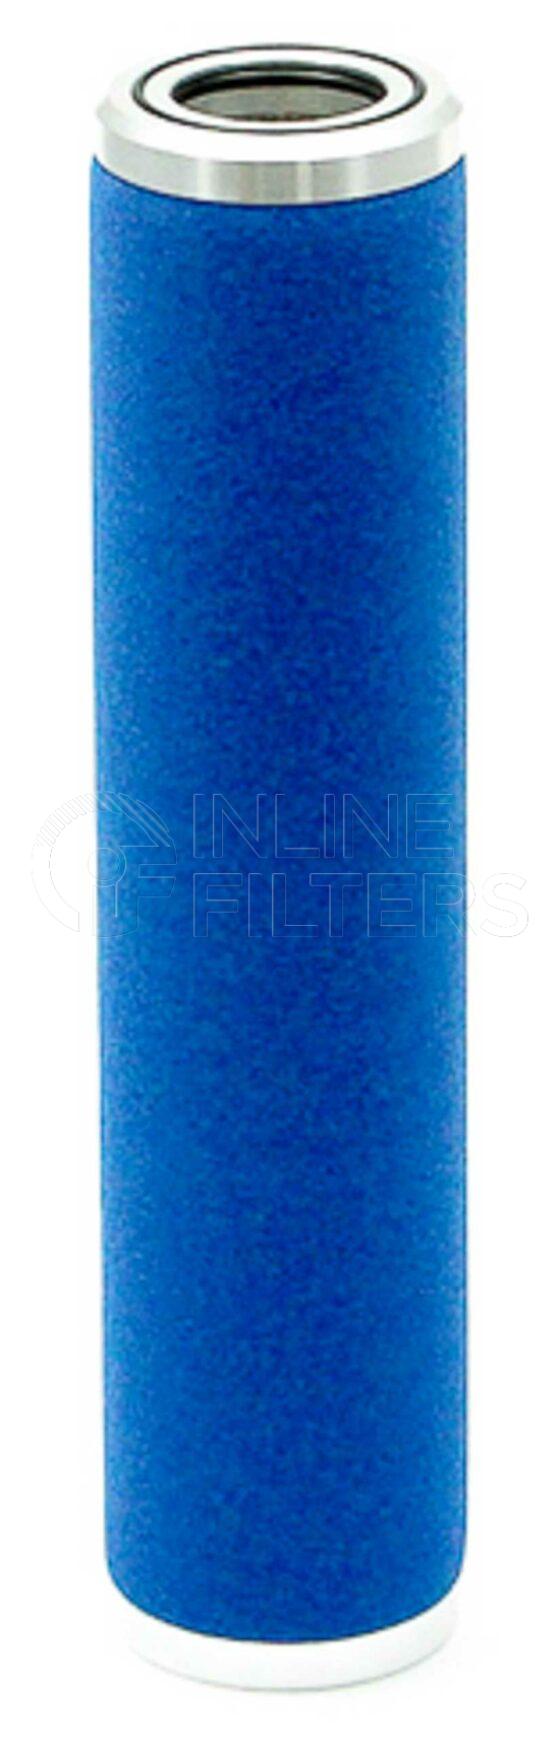 Inline FA10517. Air Filter Product – Compressed Air – O- Ring Product Air filter product